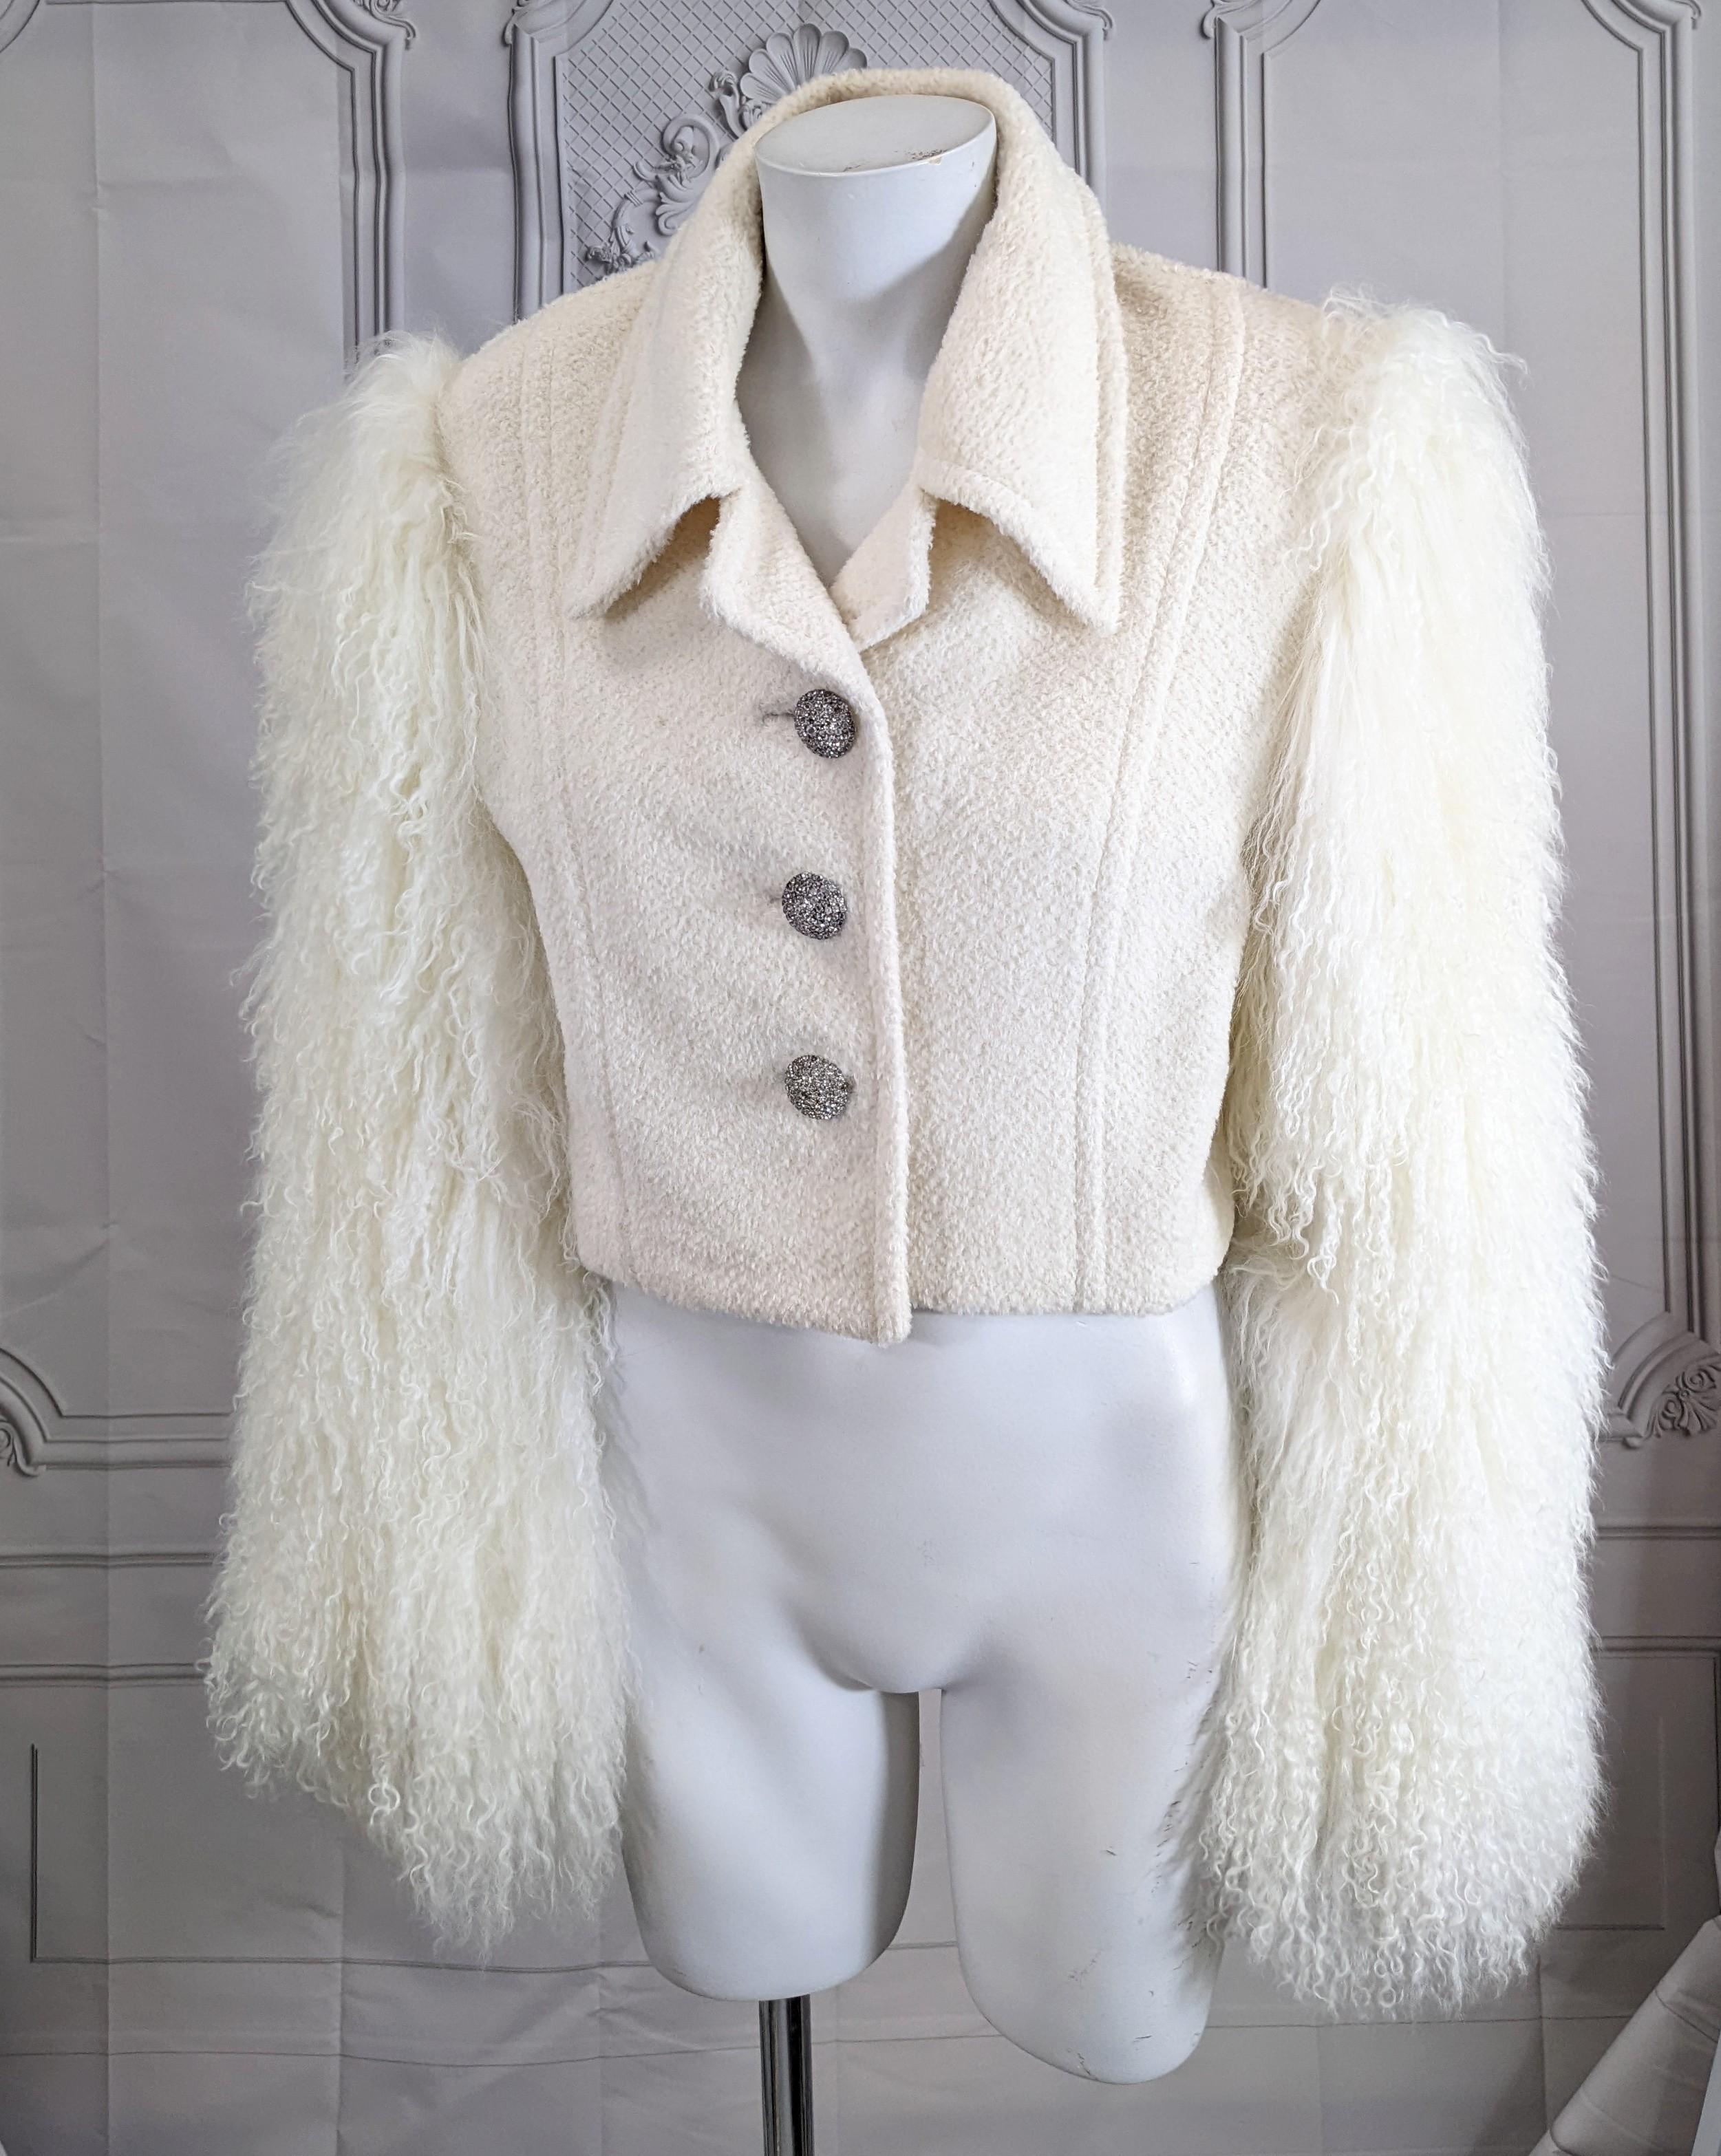 Christian Dior Haute Couture by Gianfranco Ferre of ivory mohair wool with Mongolian Lamb Sleeves. Cropped fitted shape. Handmade rhinestone dome buttons by Maison Goossens. 
Tiny, Small size, no label from a prominent NY socialite. 
DOMESTIC SALES